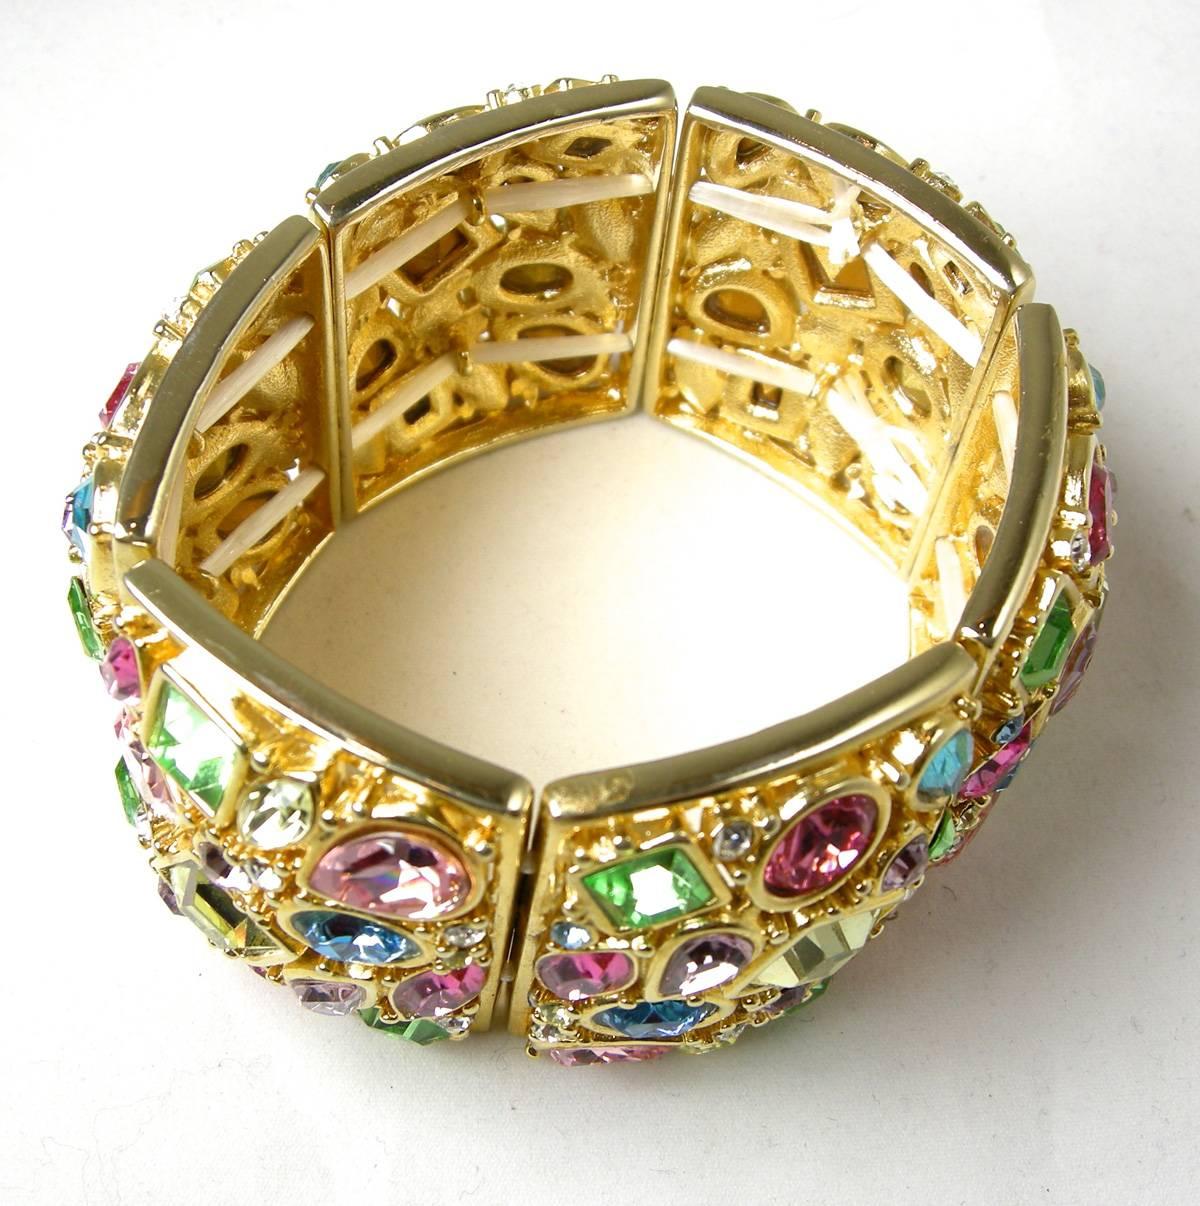 The beautiful multi-color stretch bracelet is embellished with different shapes crystals of pinks, blues, green and lavender all bezel into a gold tone metal finish. There are six rectangular segments … each measuring 1-3/4” long x 1-1/2” wide and